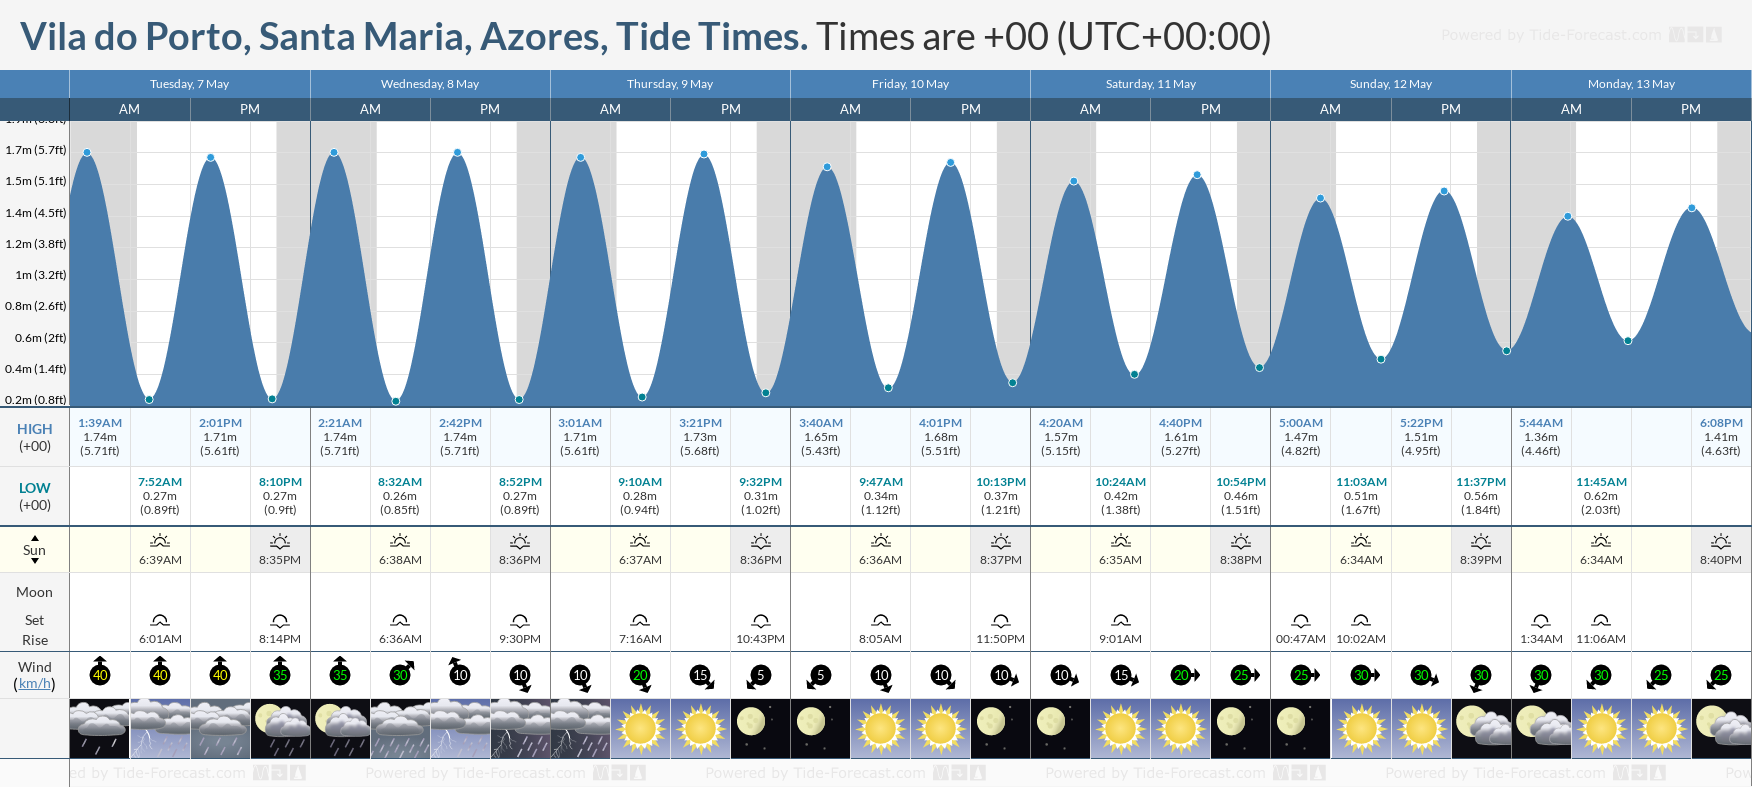 Vila do Porto, Santa Maria, Azores Tide Chart including high and low tide tide times for the next 7 days